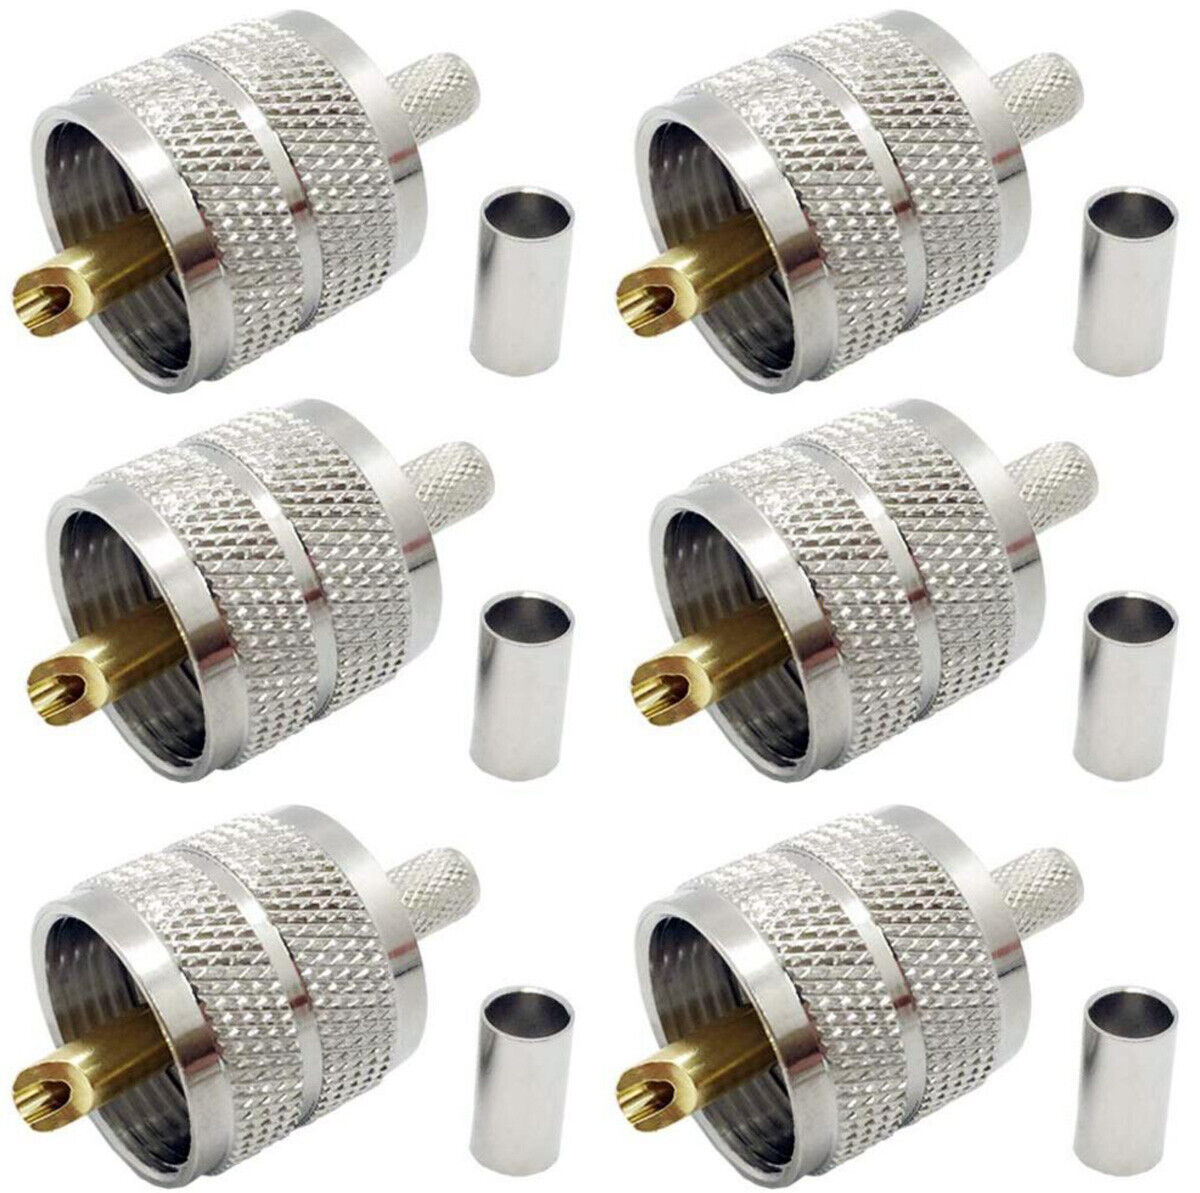 6X RG-8X, LMR-240 Crimp-On UHF Male PL-259 Connector Nickel Plated Coaxial 6pcs WIREDCO UHF-03Z-TSS IP